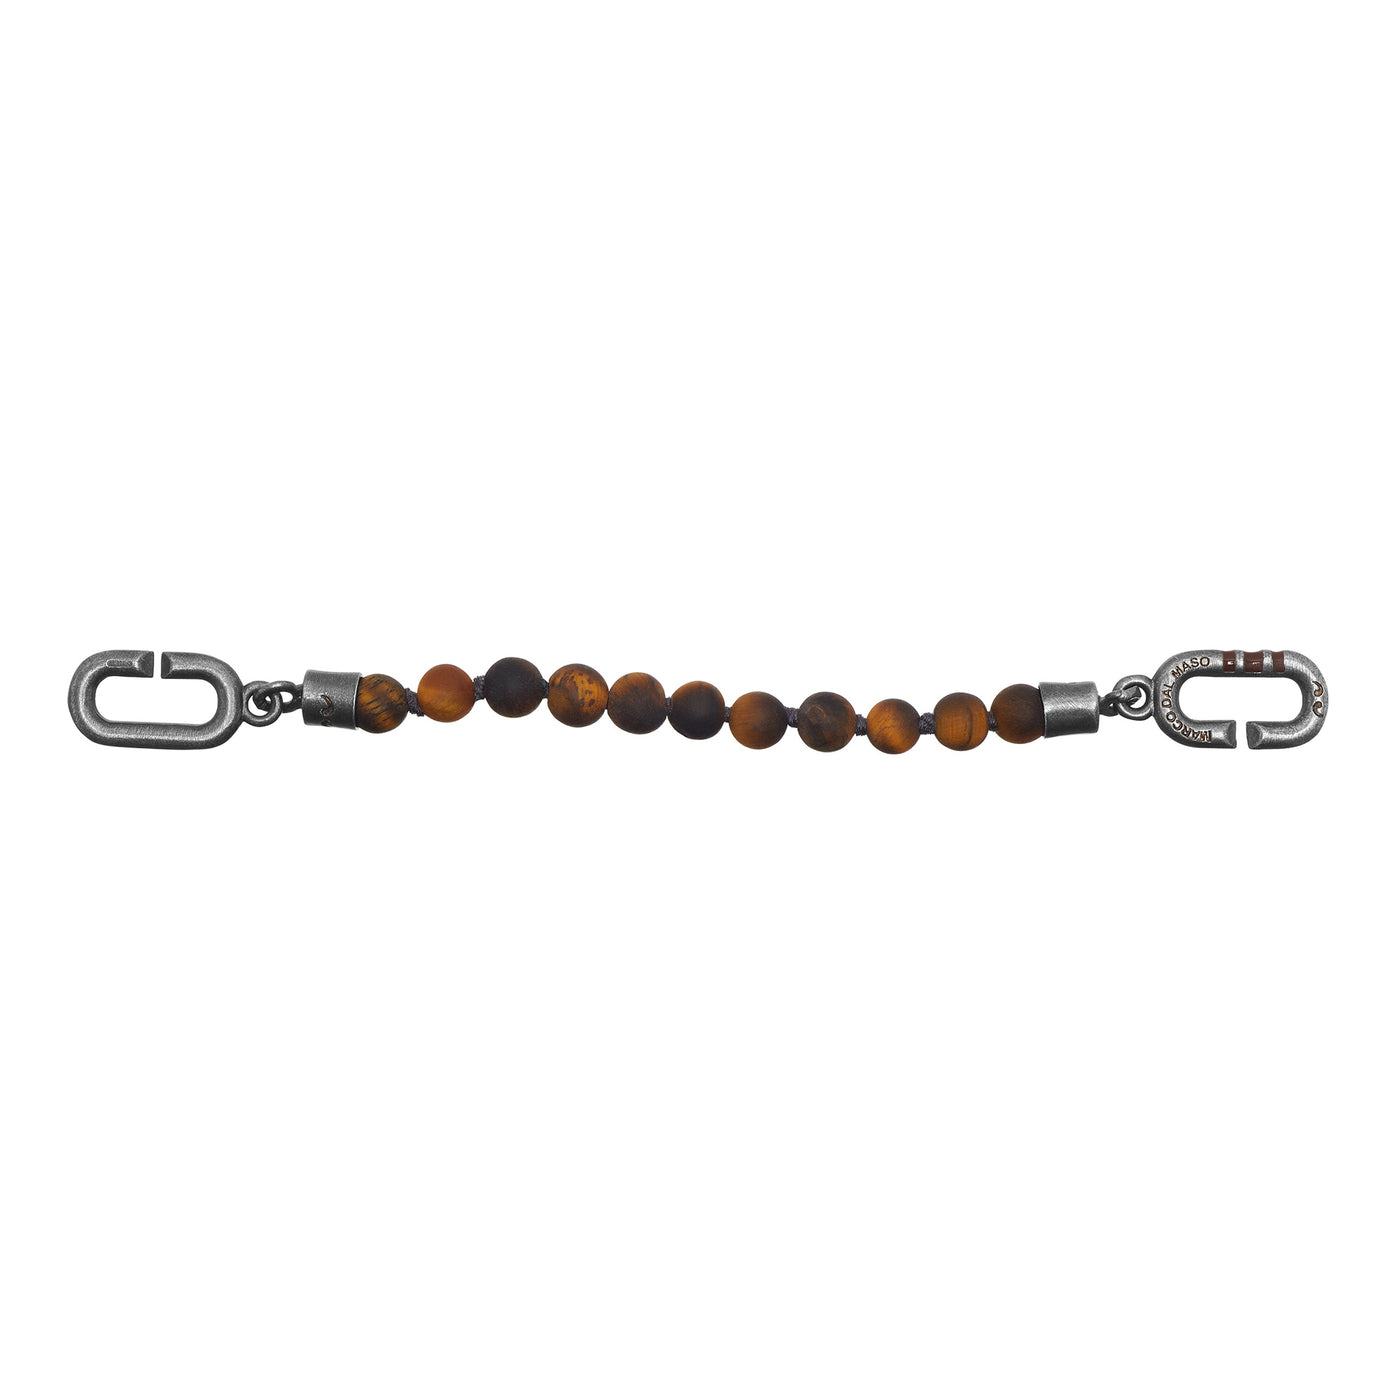 THE LINK Tiger Eye Extension Beads